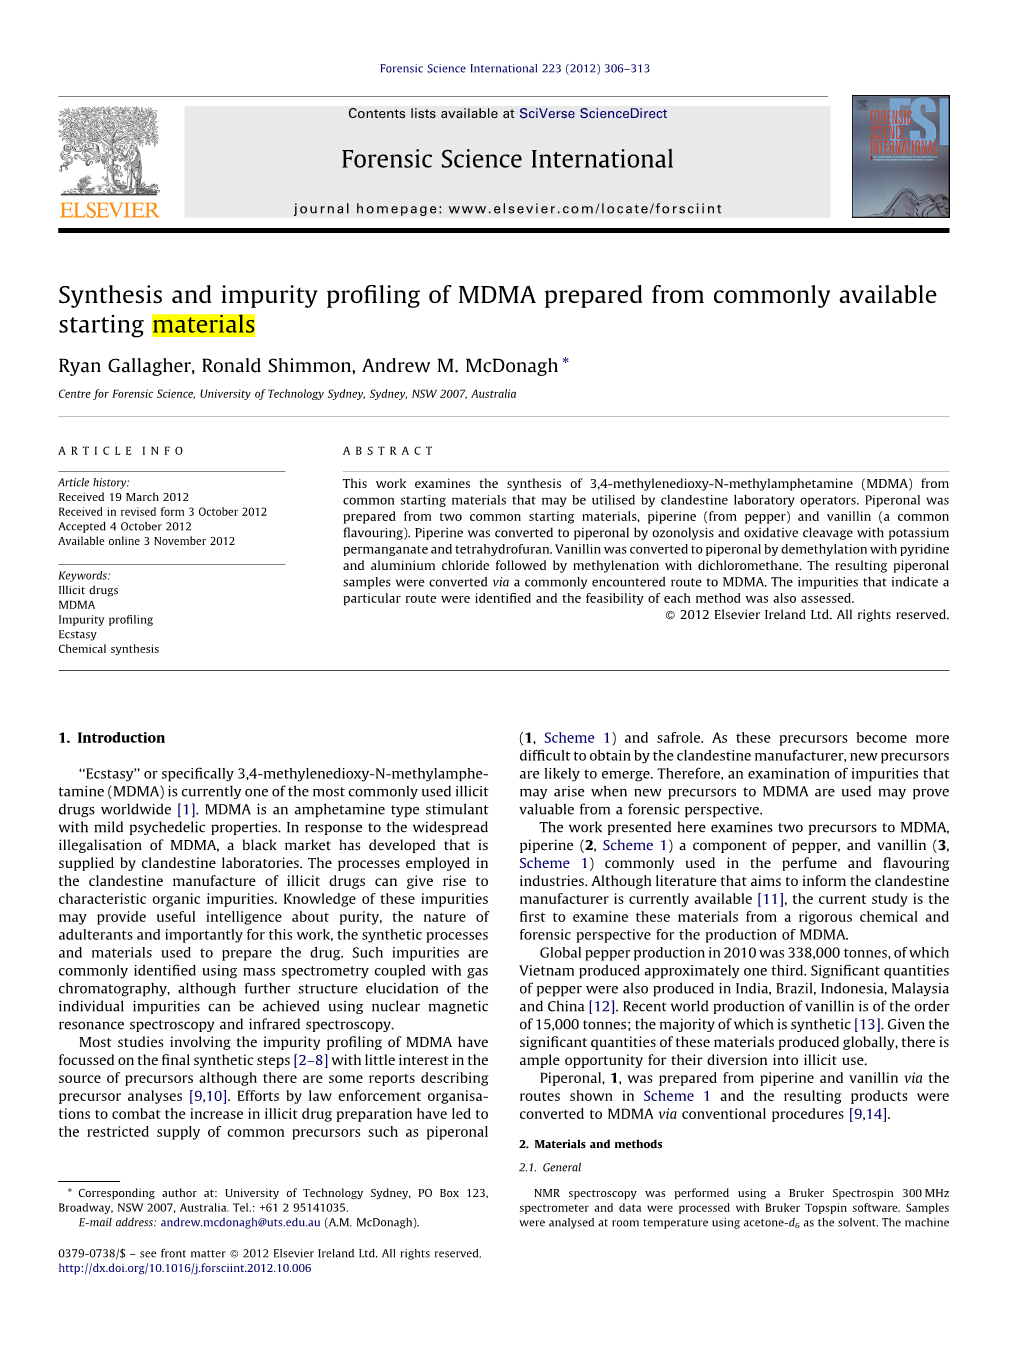 Synthesis and Impurity Profiling of MDMA Prepared from Commonly